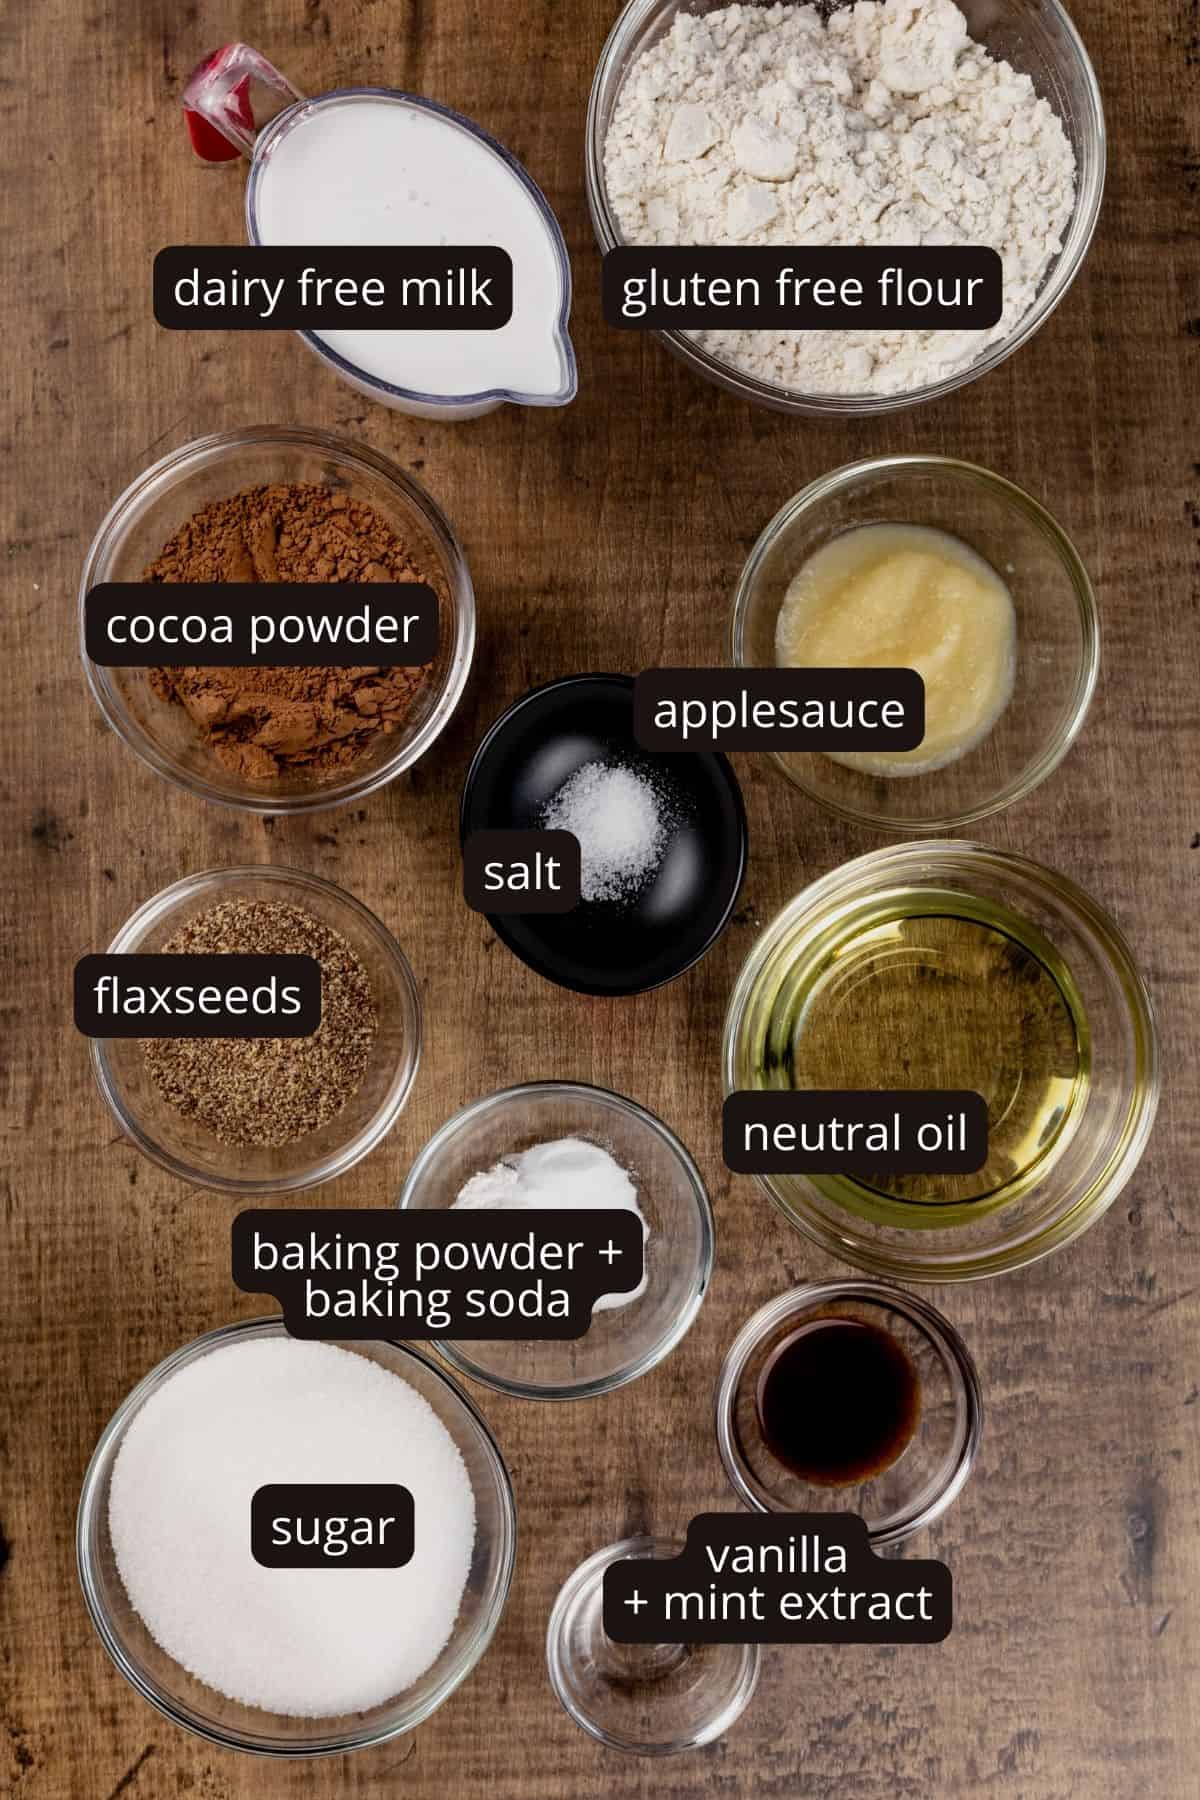 Ingredients for mint chocolate cupcakes in various glass bowls on the wood kitchen table. Black and white labels have been added to name each ingredient.